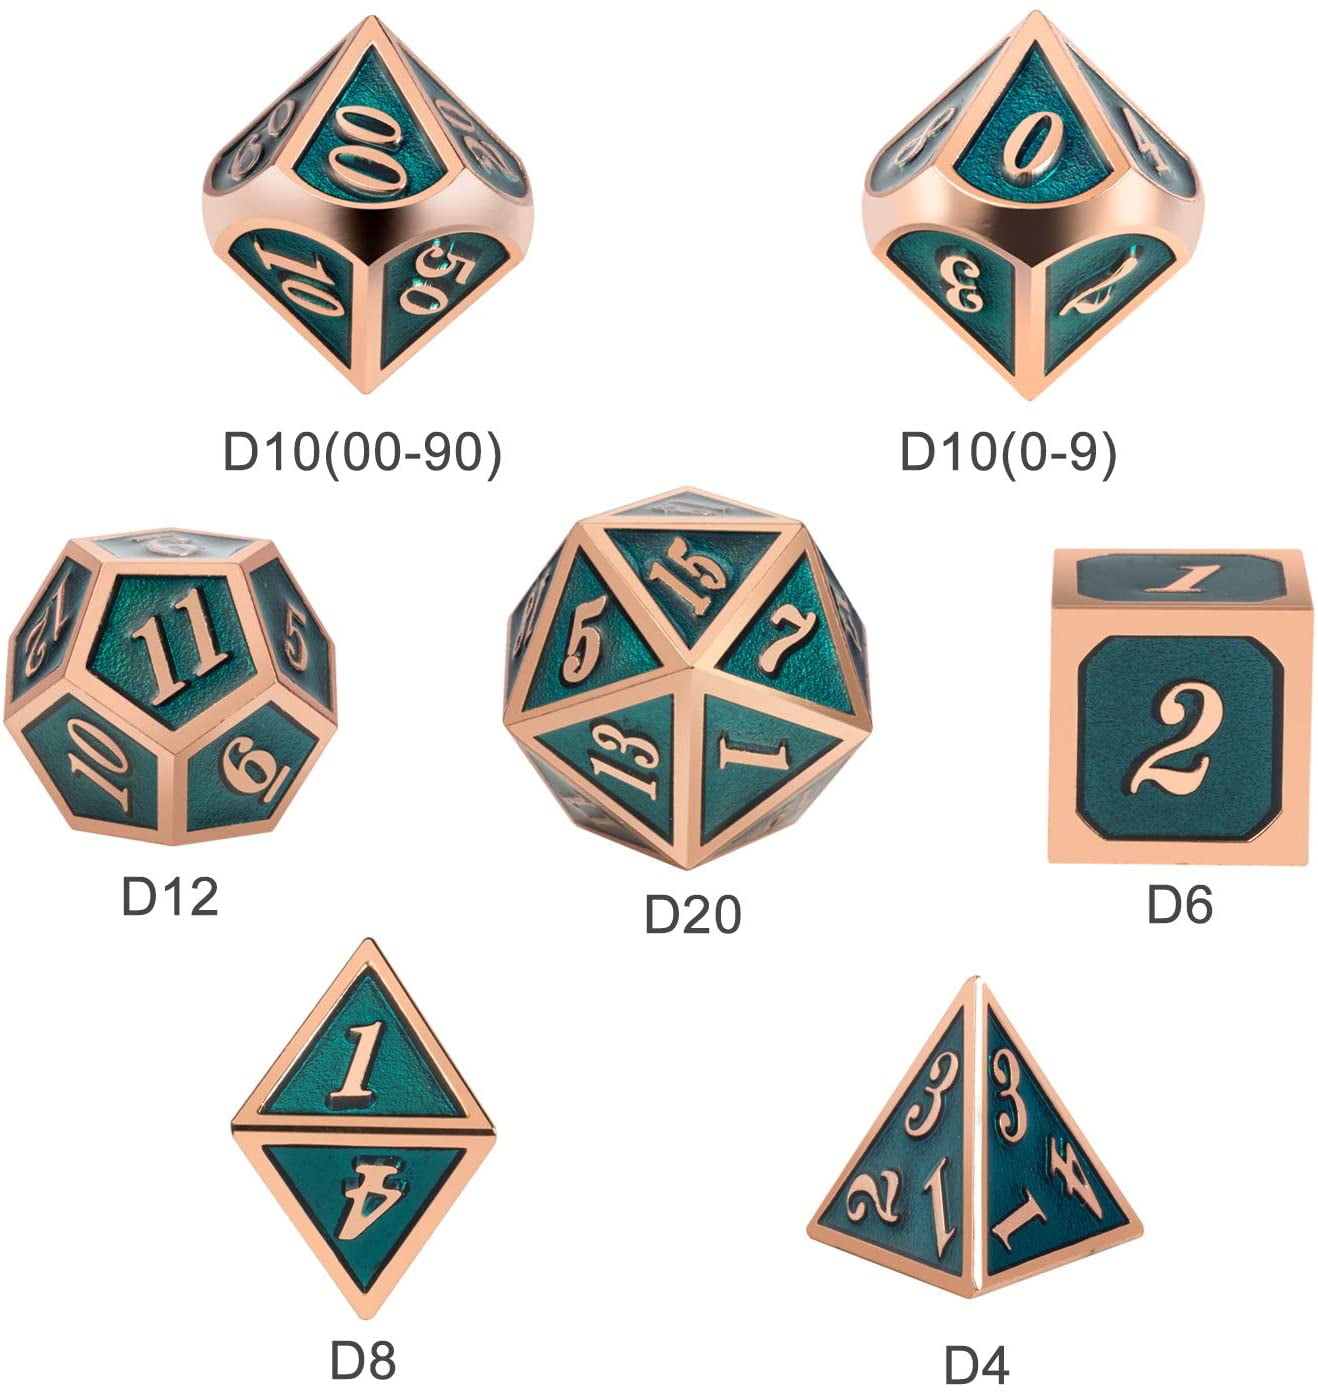 Teal D&D Metal Dice Set,DNDND 7 PCS Metallic Dungeons and Dragons Dice with Free Metal Case for D&D Game Role Playing Teal and Copper 